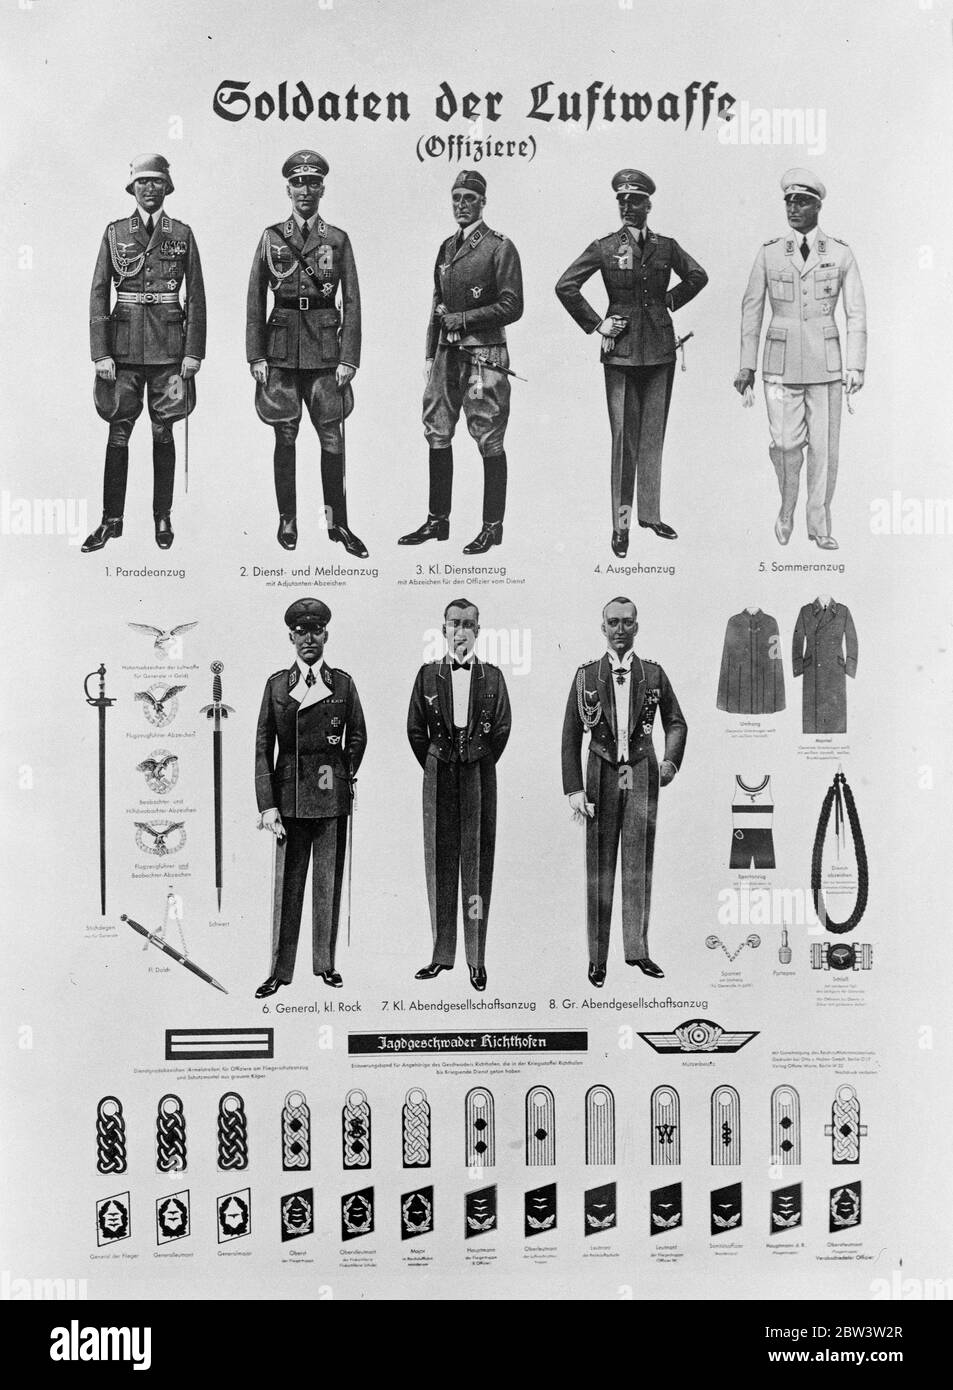 Germany shows off her airforce . Posters are being distributed throughout the country illustrating the various uniforms worn by officers and the insignia ' s . 8 August 1935 Stock Photo